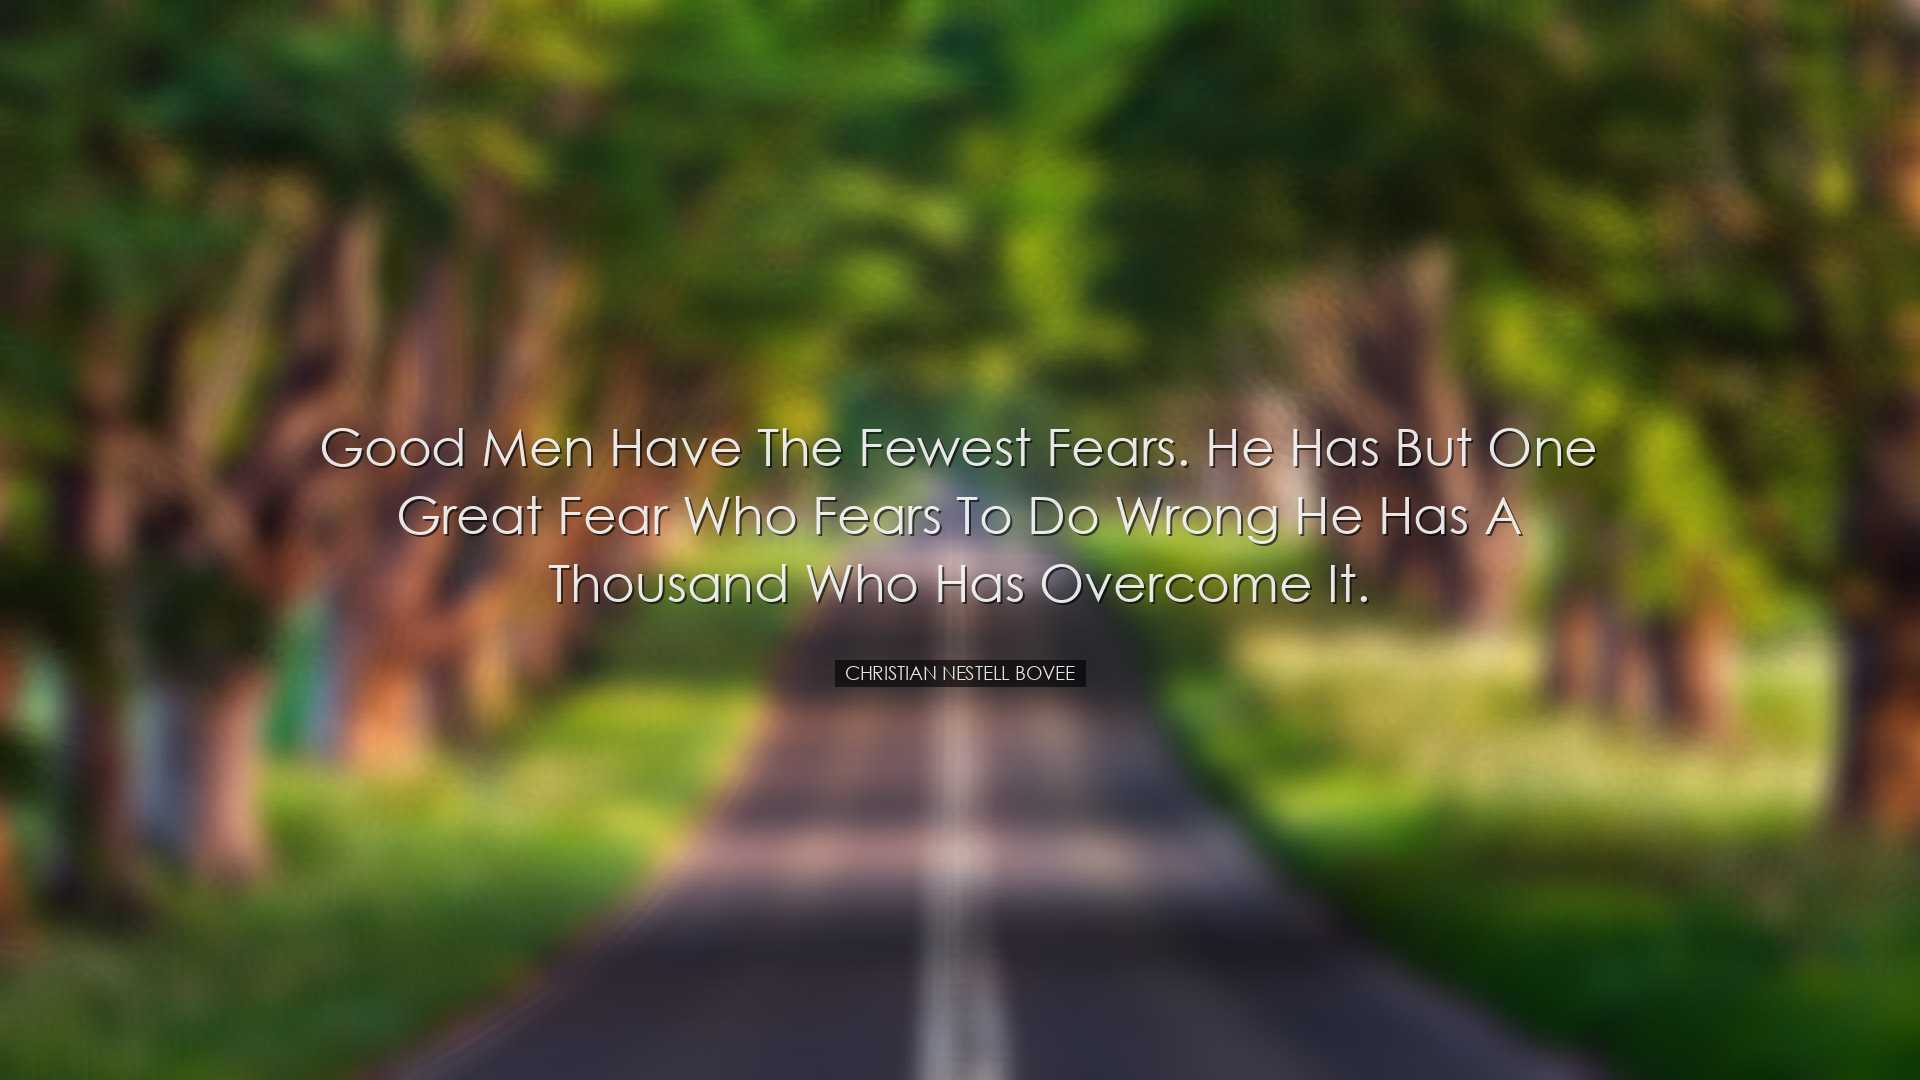 Good men have the fewest fears. He has but one great fear who fear